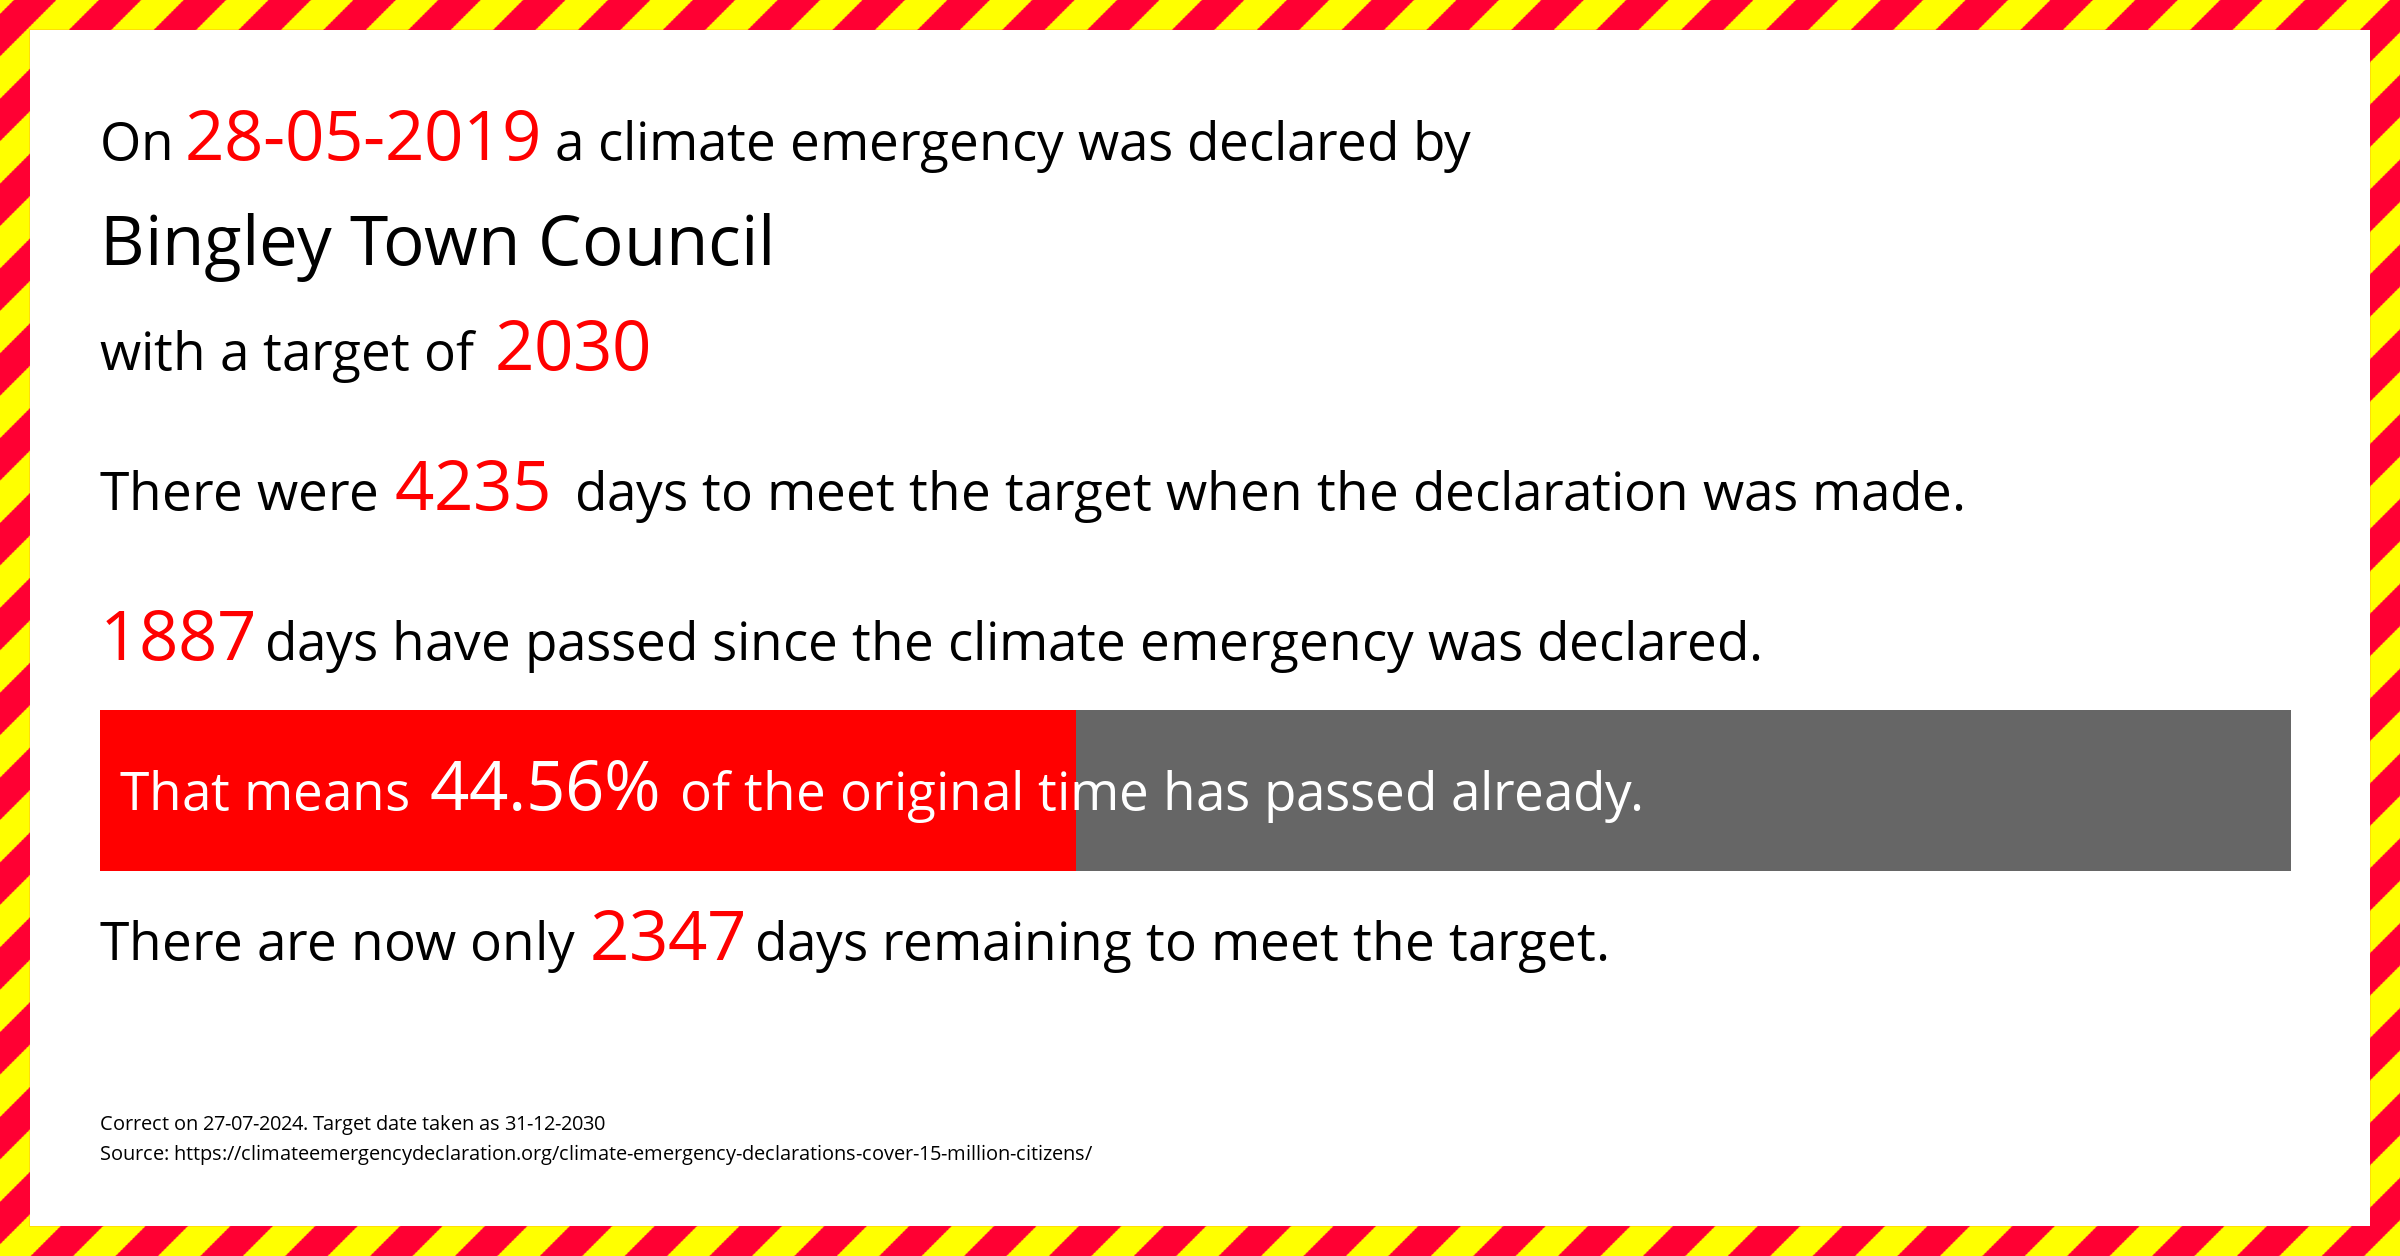 Bingley Town Council  declared a Climate emergency on Tuesday 28th May 2019, with a target of 2030.